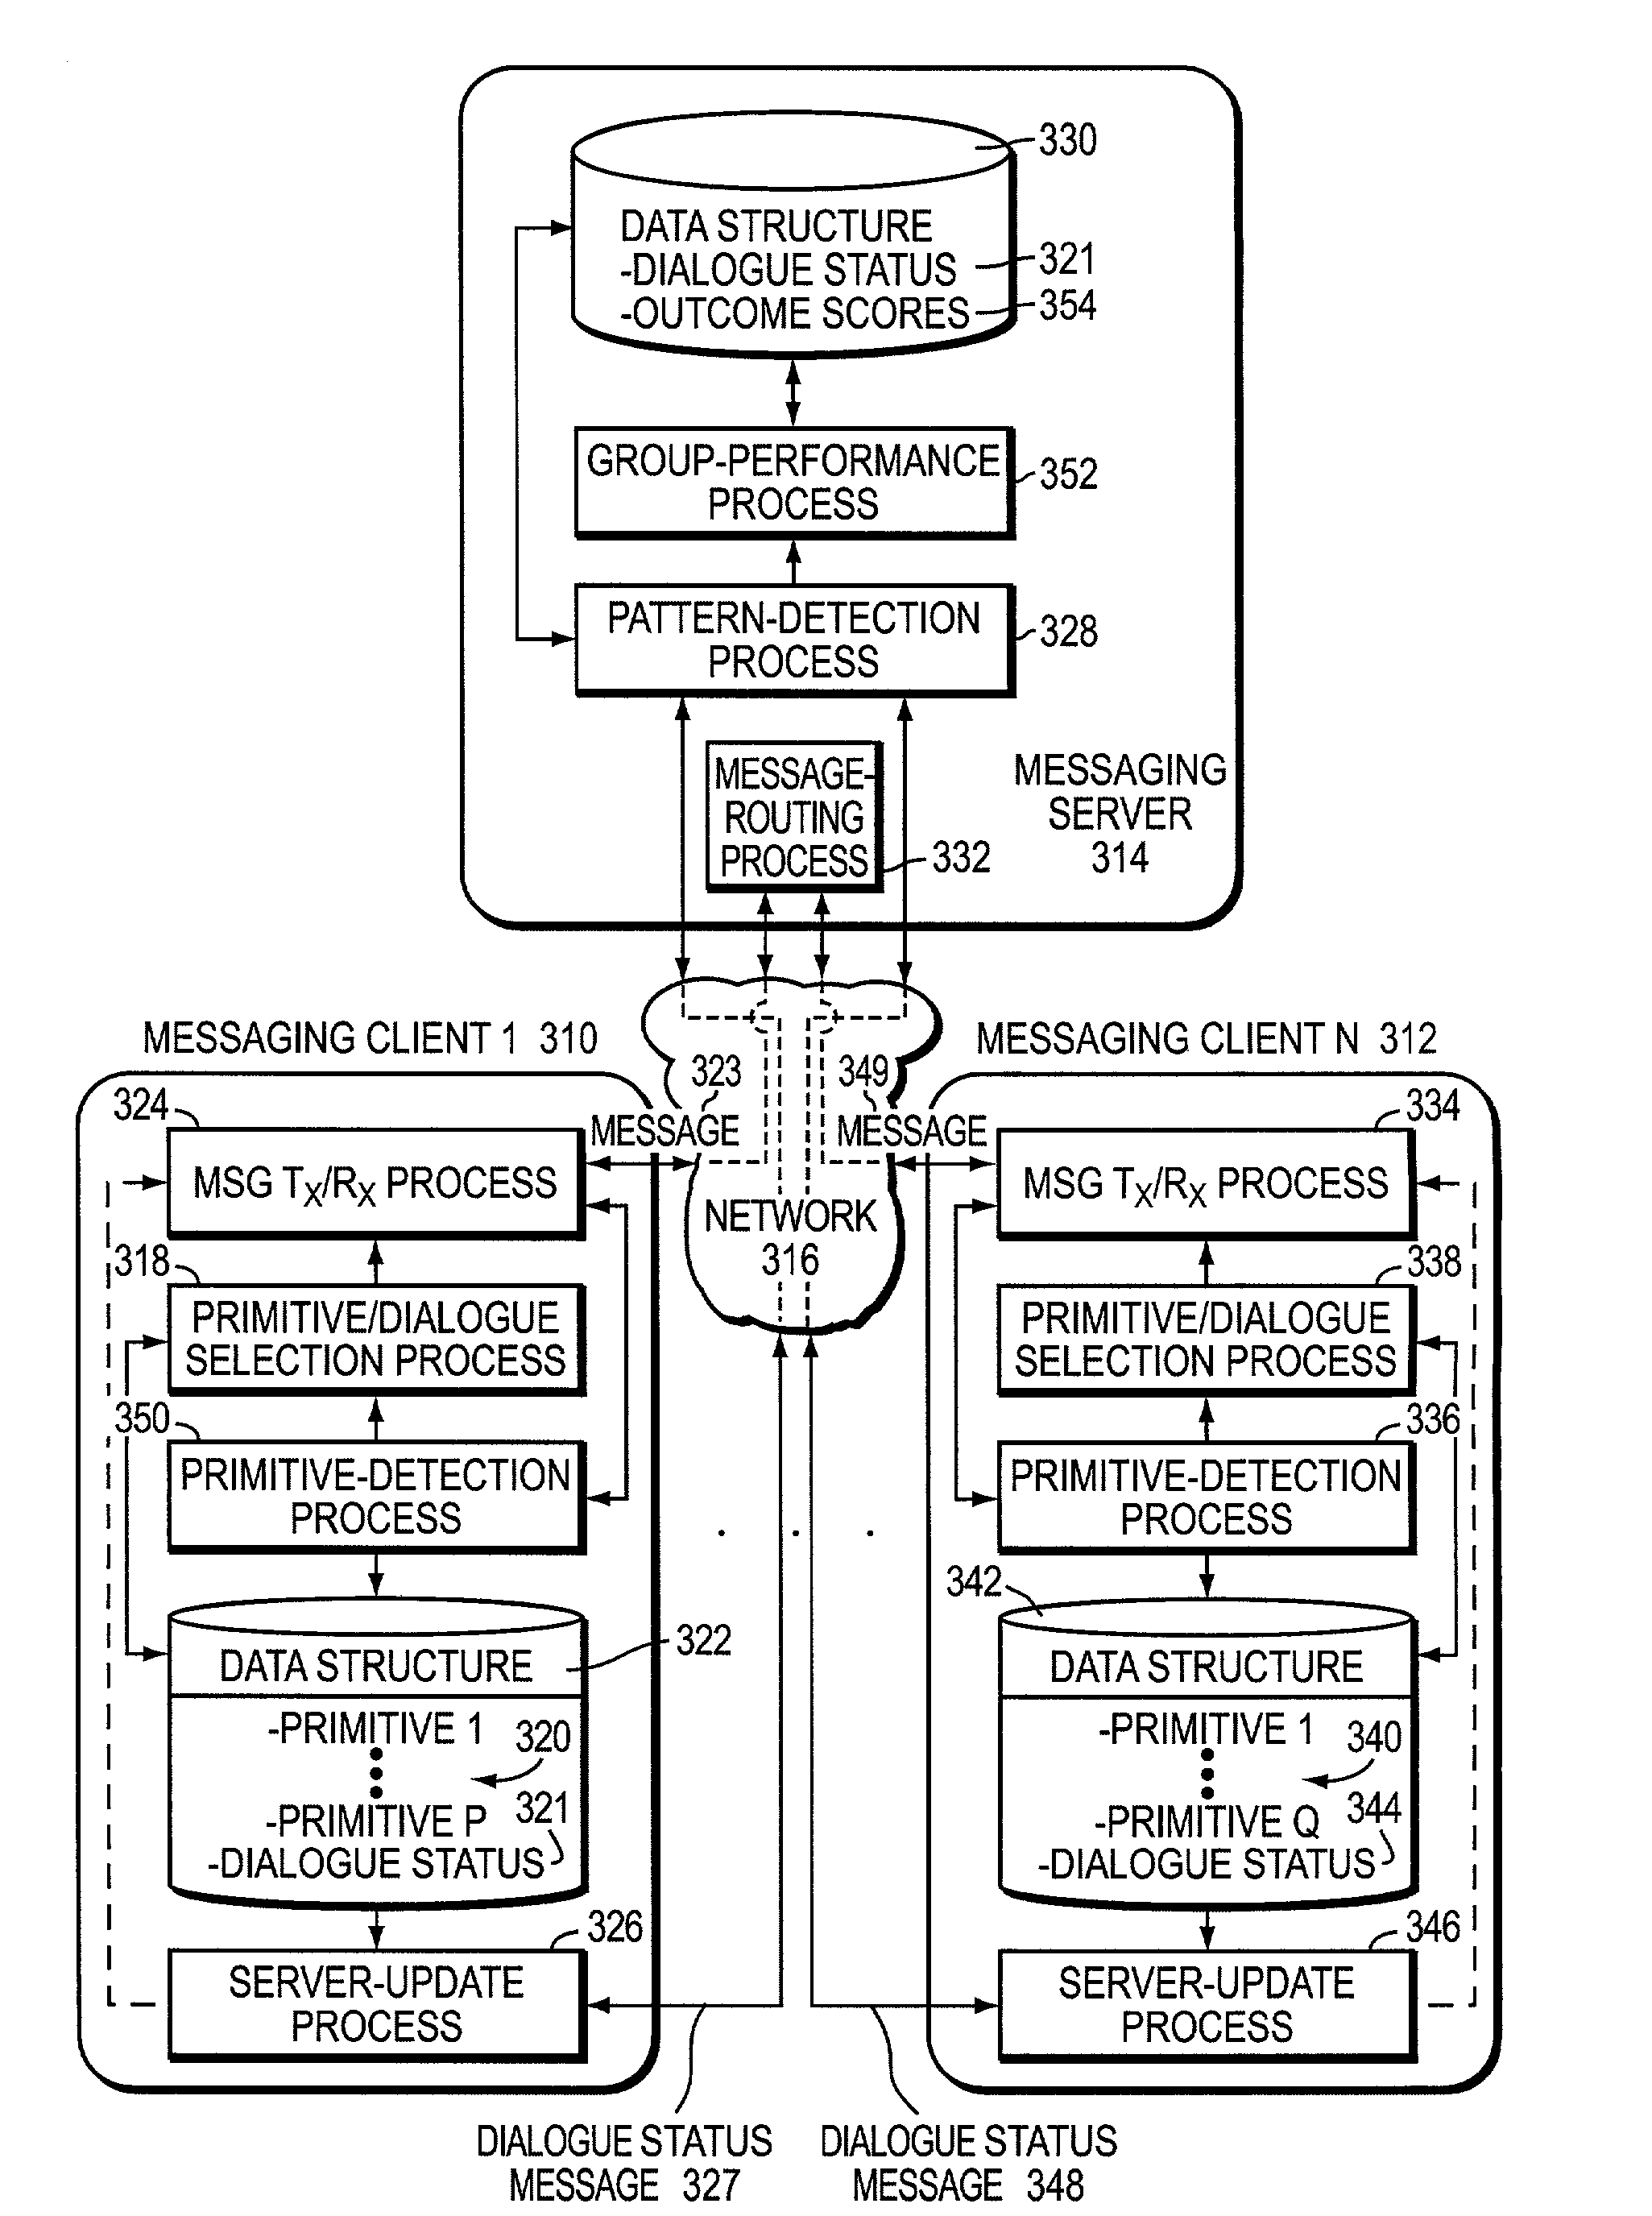 Method and system for characterizing relationships in social networks